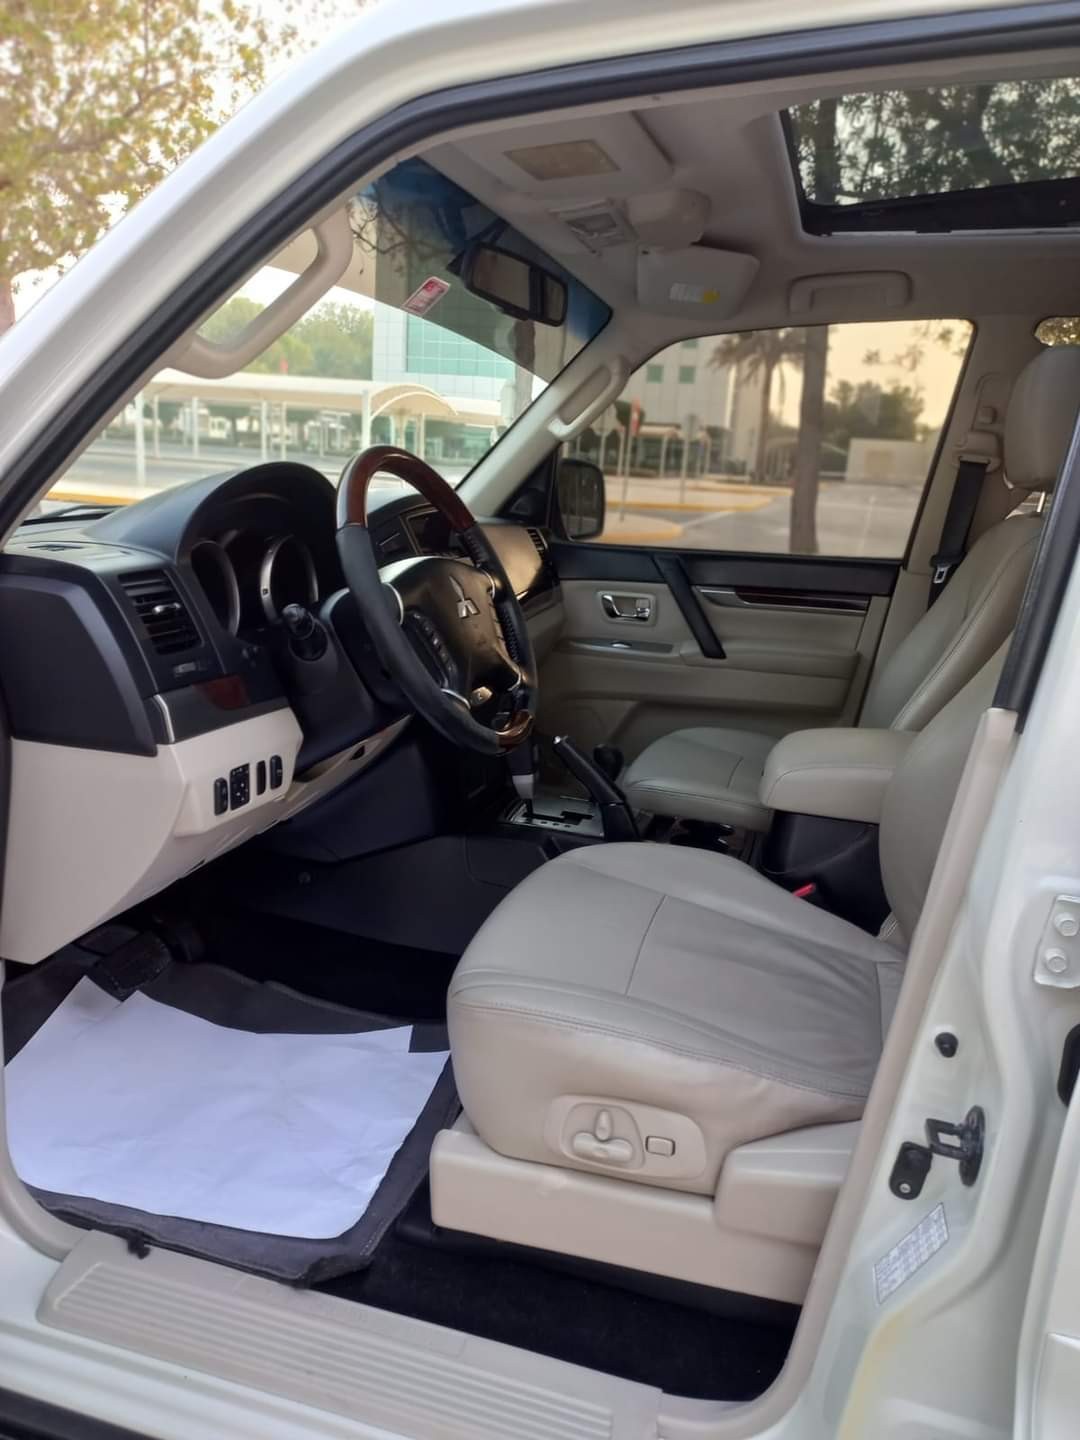 Mitsubishi Pajero 2011 for only 8,000 aed